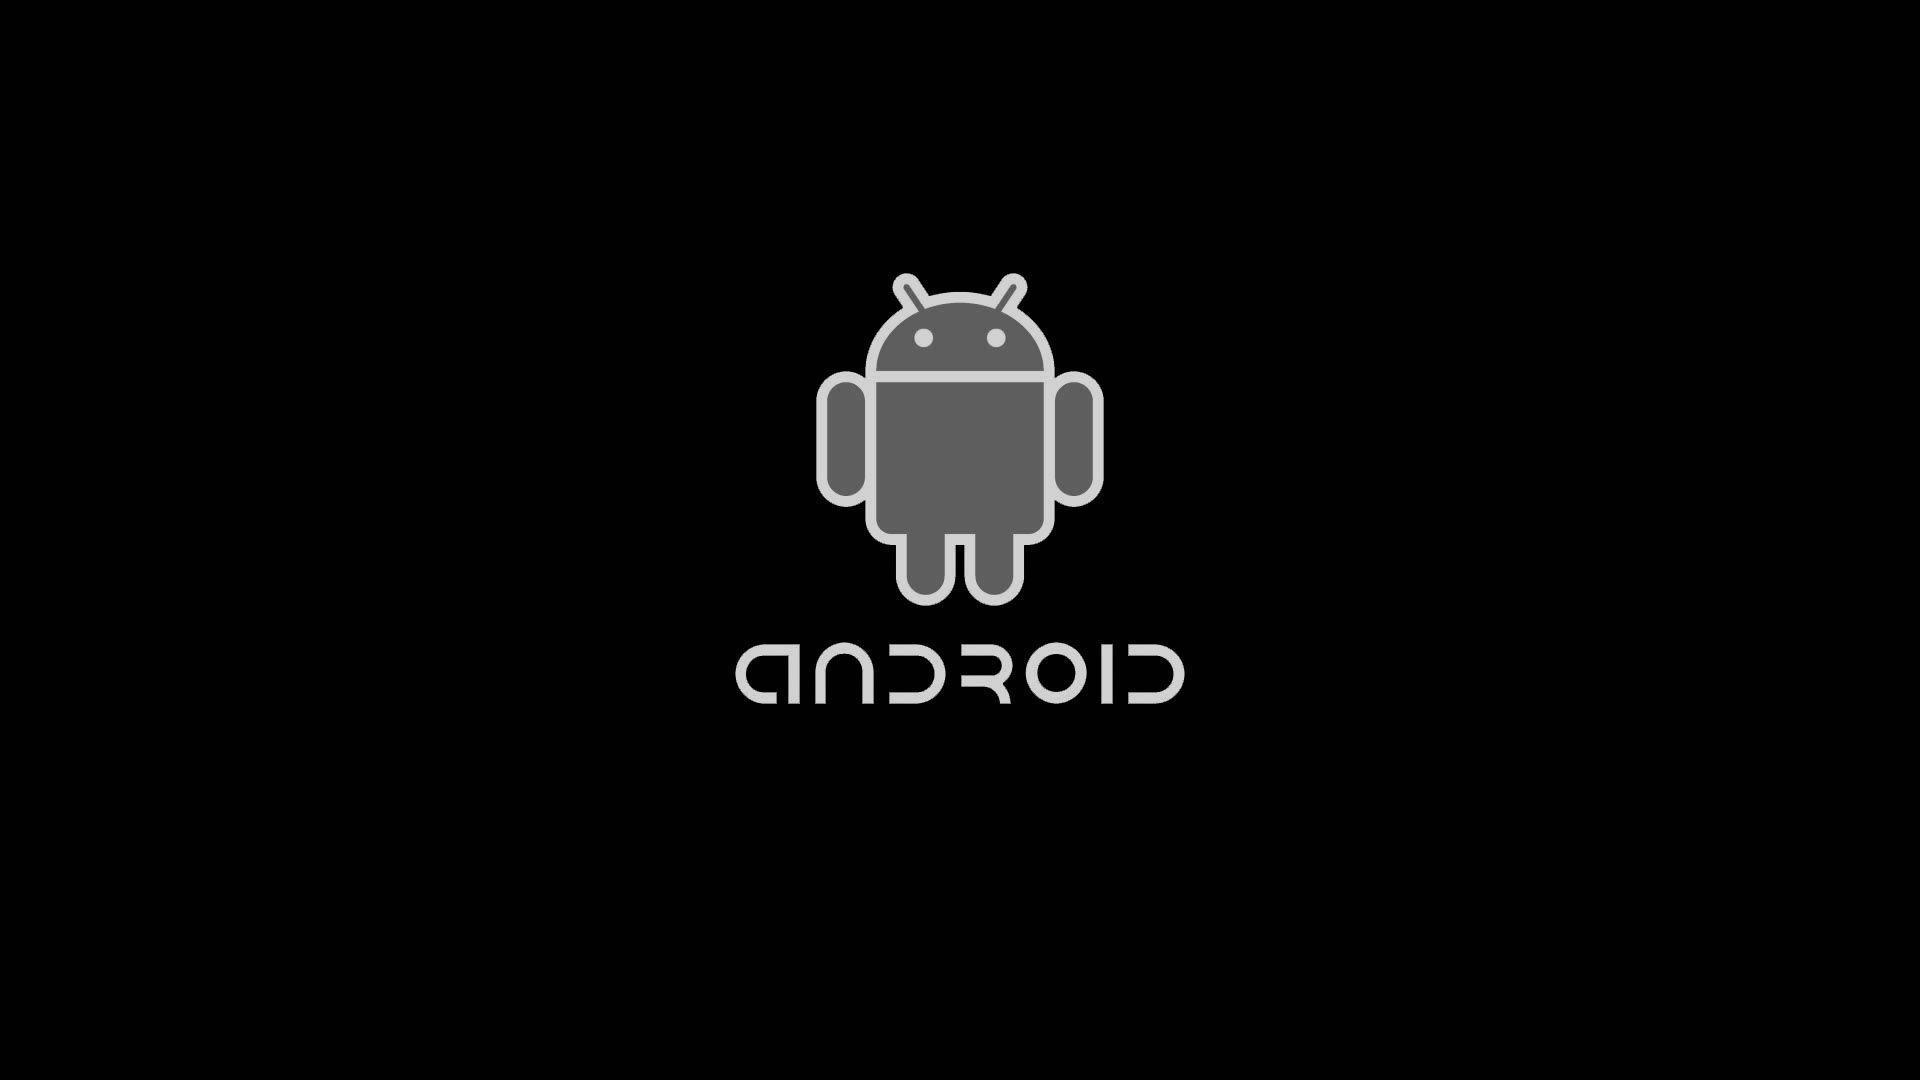 OS, Dark Android Wallpaper HD 1080x1920px Android Wallpaper